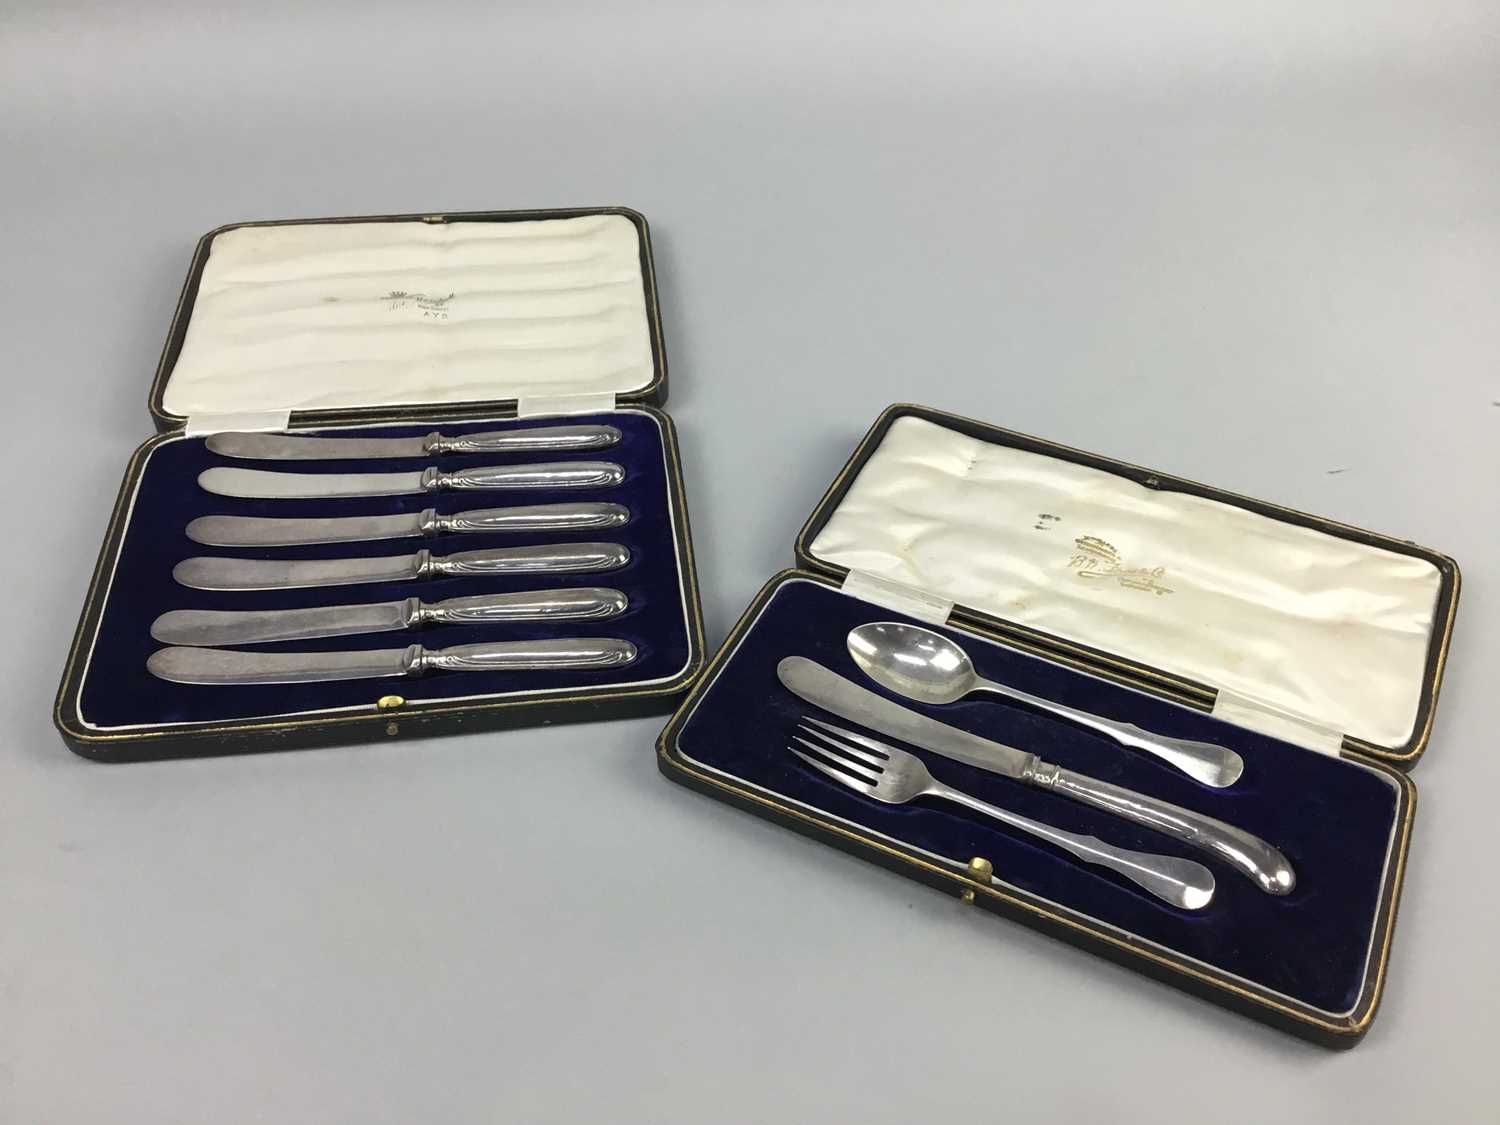 Lot 10 - A SILVER CHRISTENING SET AND A SET OF SILVER KNIVES